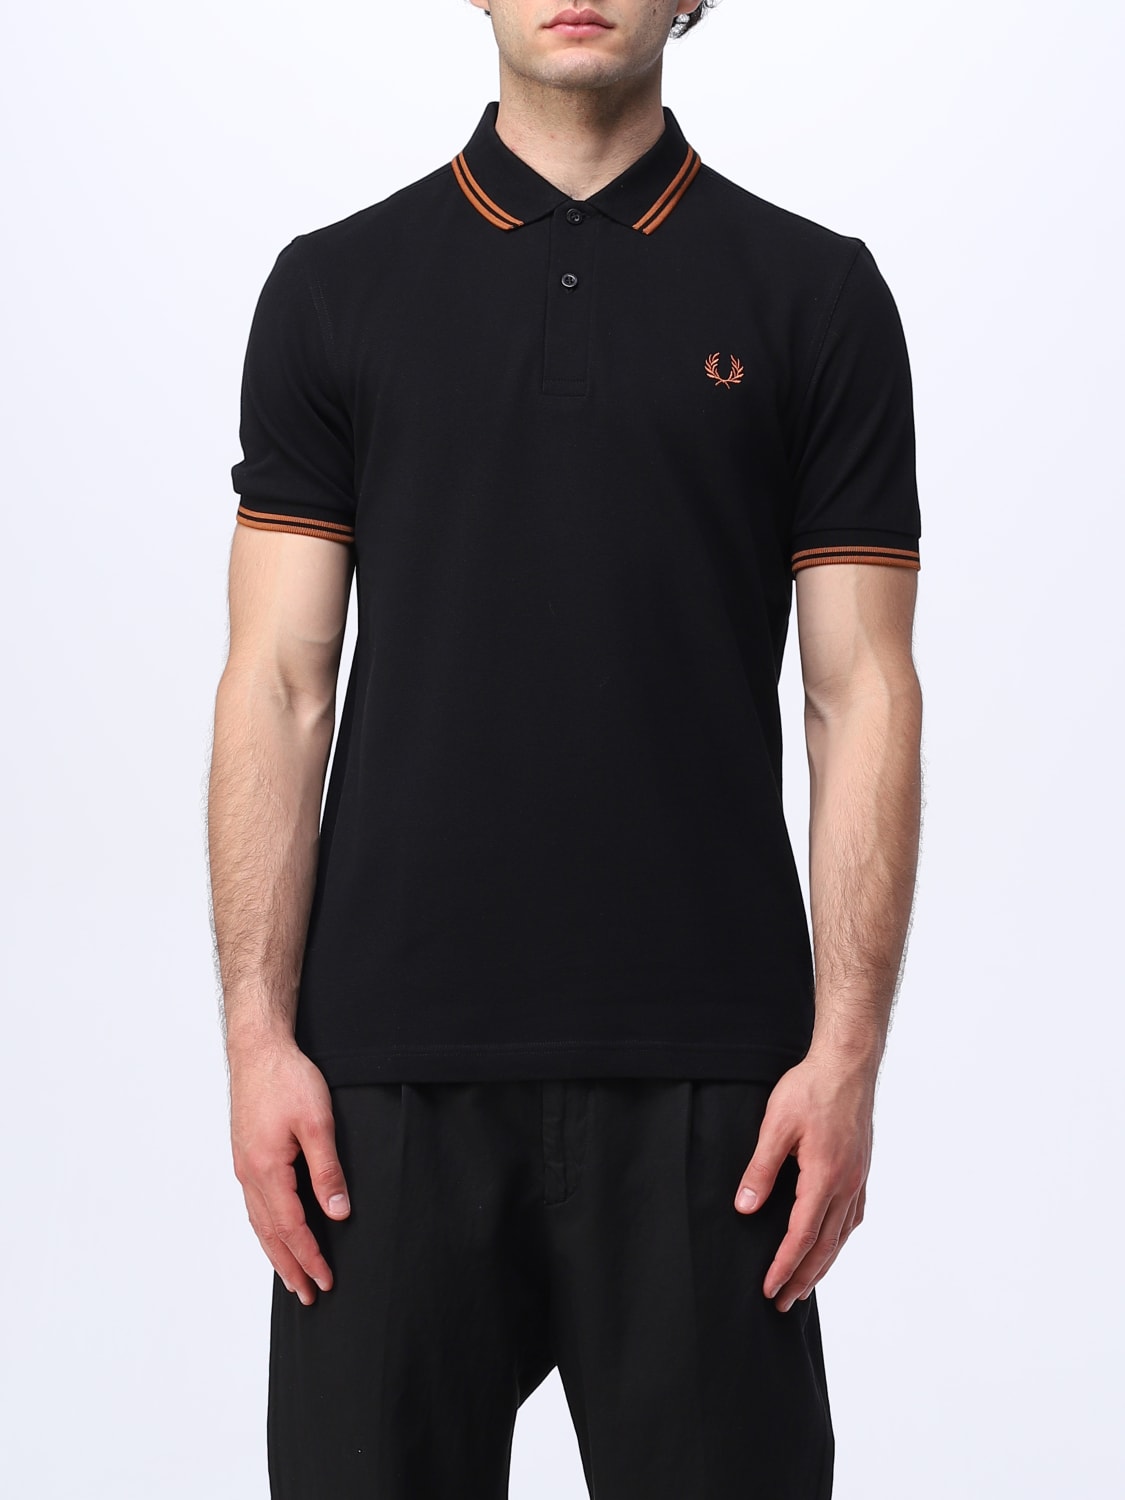 FRED PERRY: polo shirt for man - Black | Fred Perry polo shirt M3600 ...